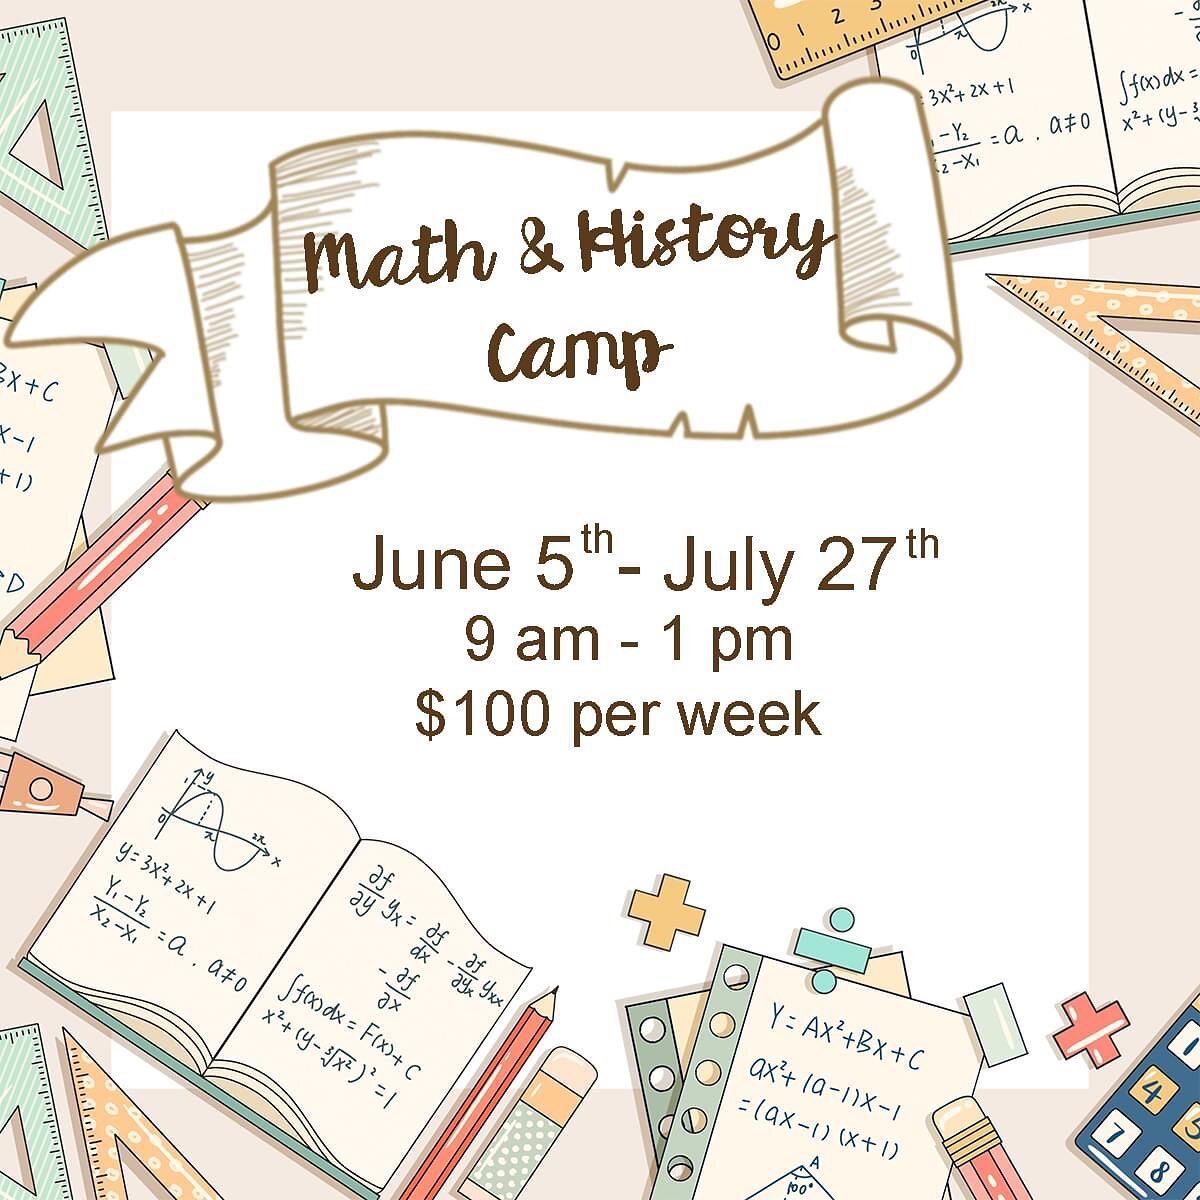 Are you looking for a SUMMER CAMP? 

The following are details for 6 weeks of Summer Camp for rising 5th-8th graders with Mr. Mark. Your child is free to attend as many weeks as you like, as long as space is available. As noted, there will be 8 slots